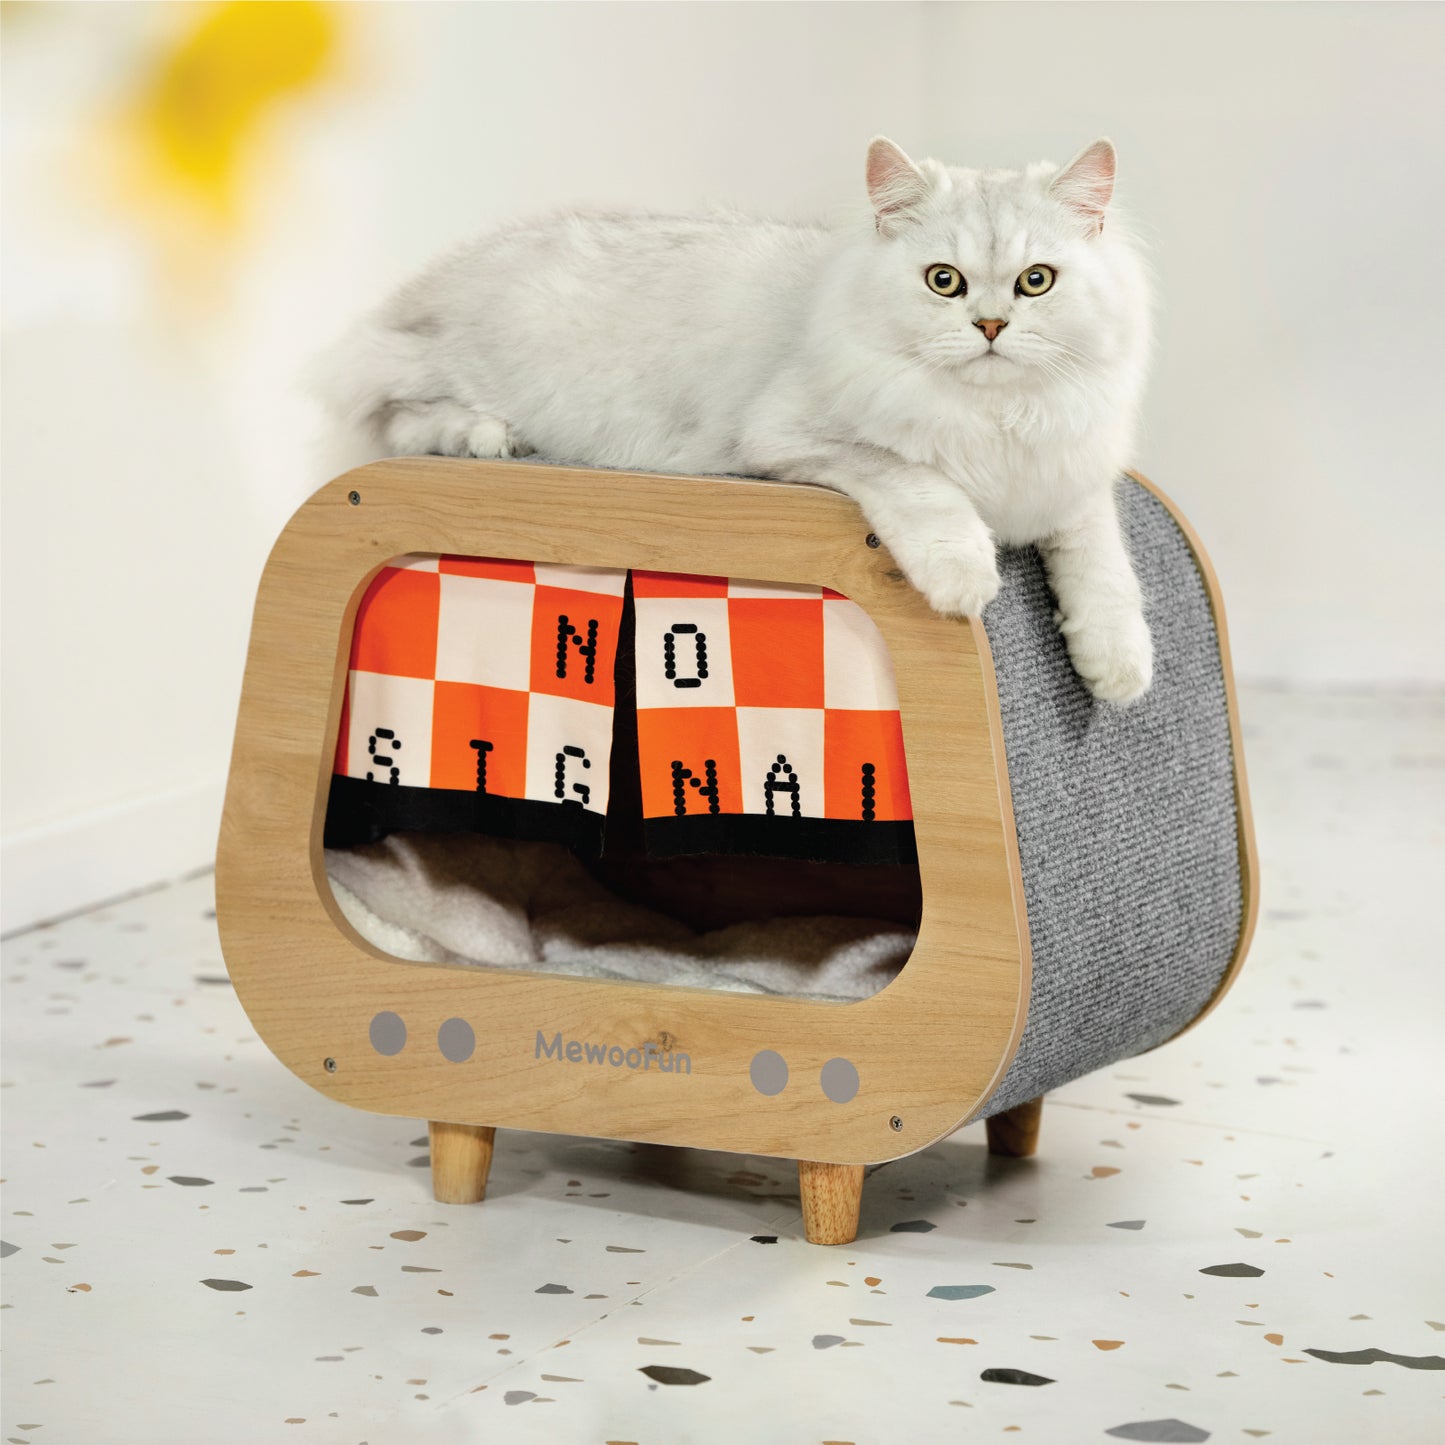 Classic Wooden TV-Shaped Cat Bed, Cat House with Cushion, Grey